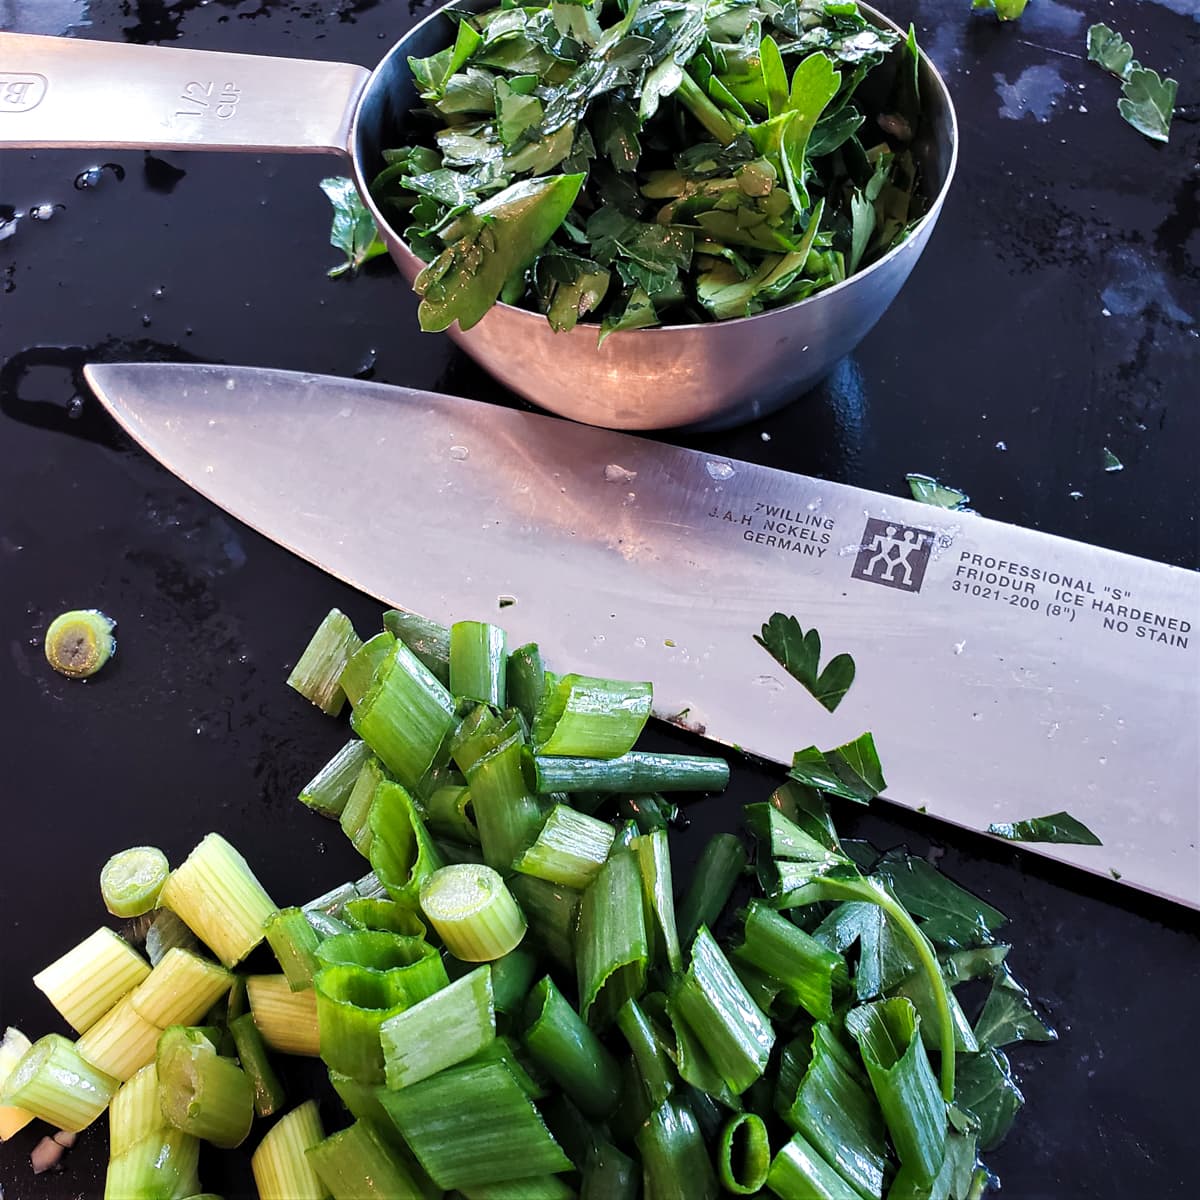 ½ cup measuring cup with parsley and diced green onion on a cutting board.